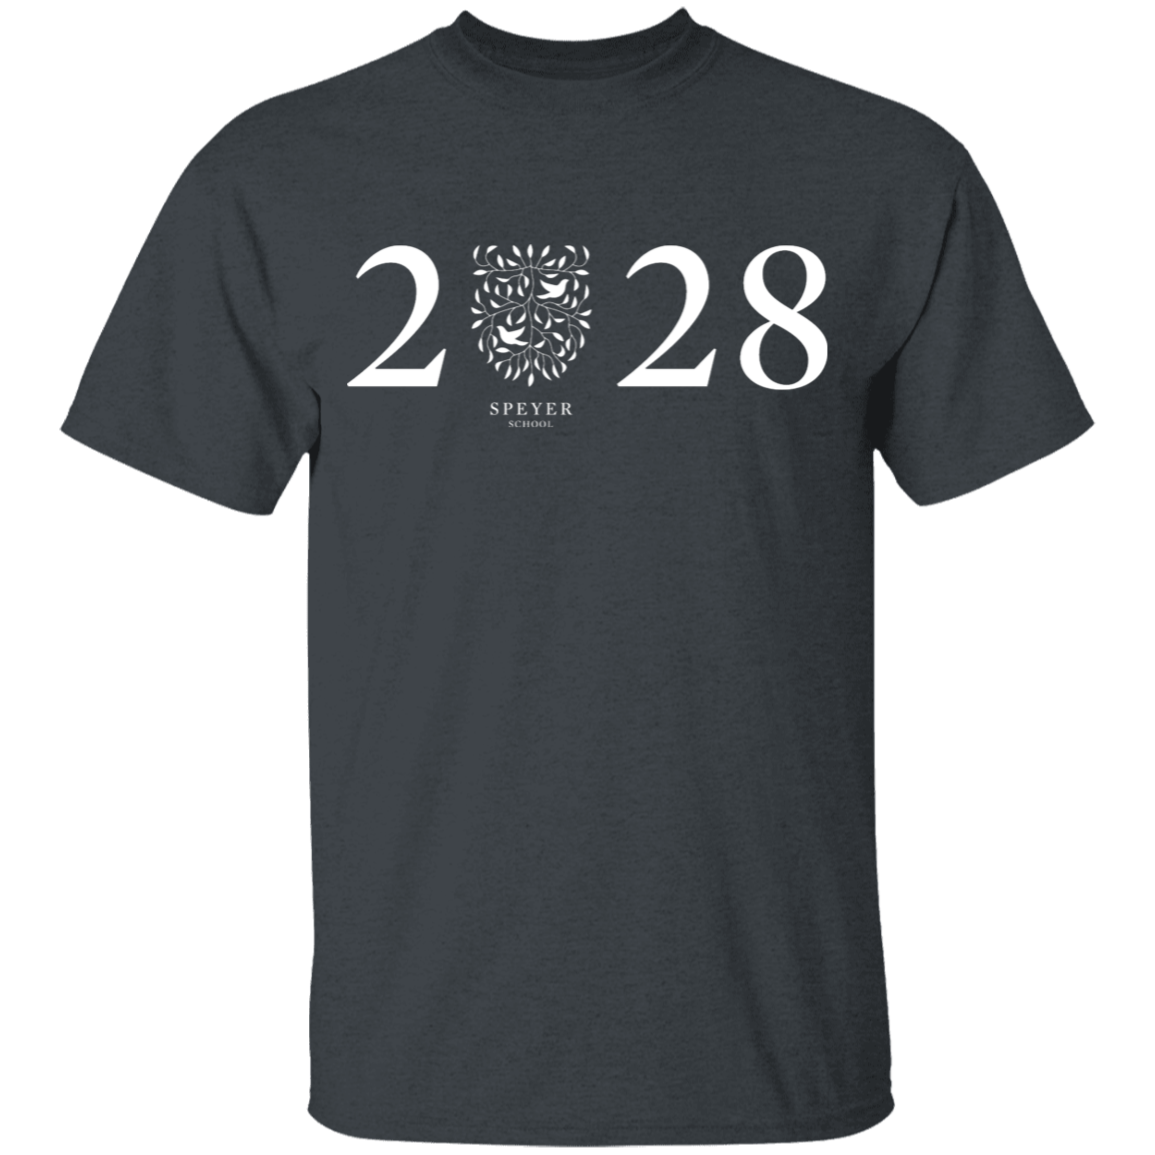 Class of 2028 T-Shirt, Youth SIzes